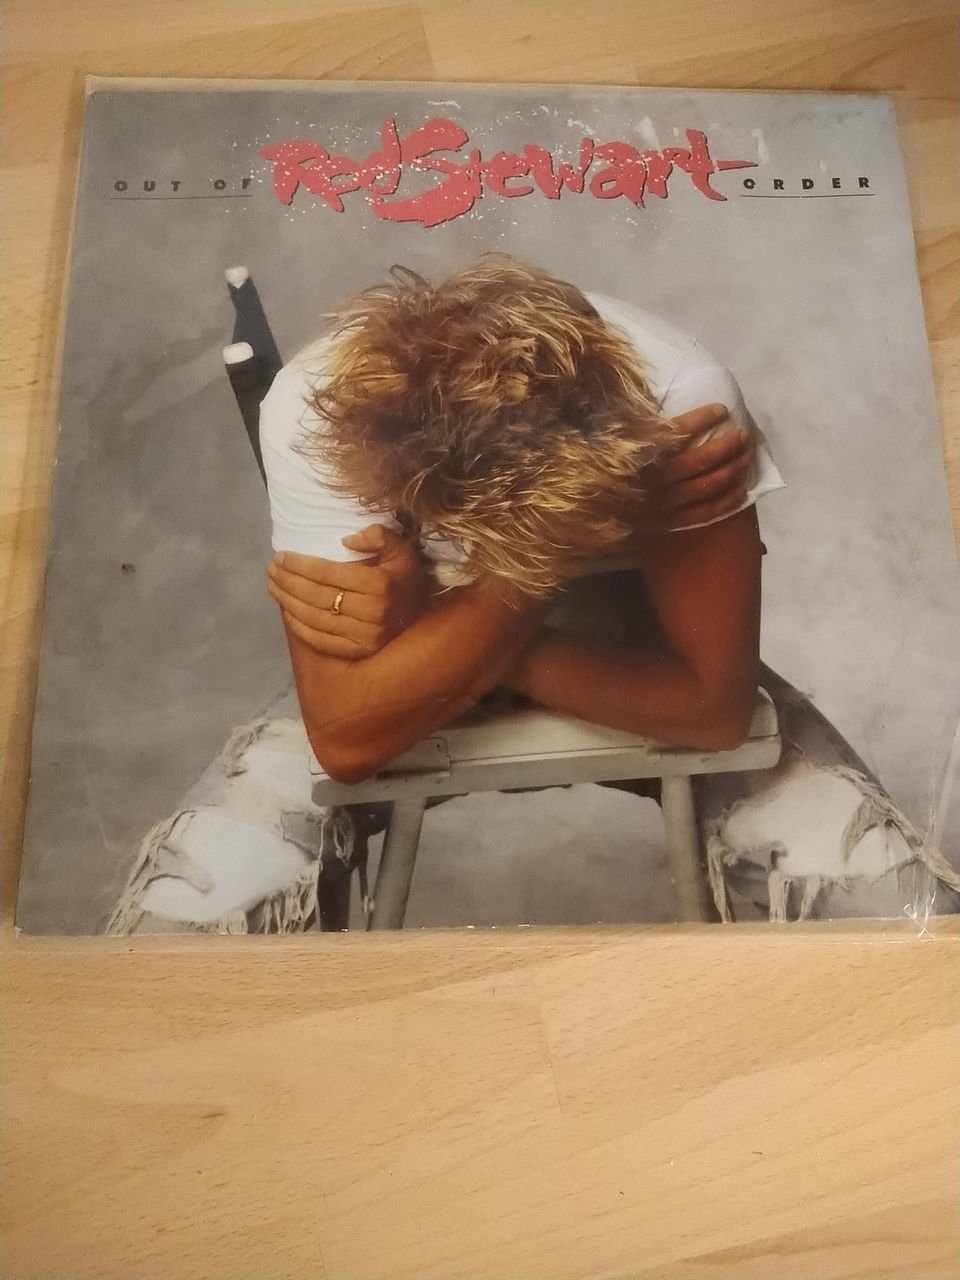 Rod Stewart out of order LP